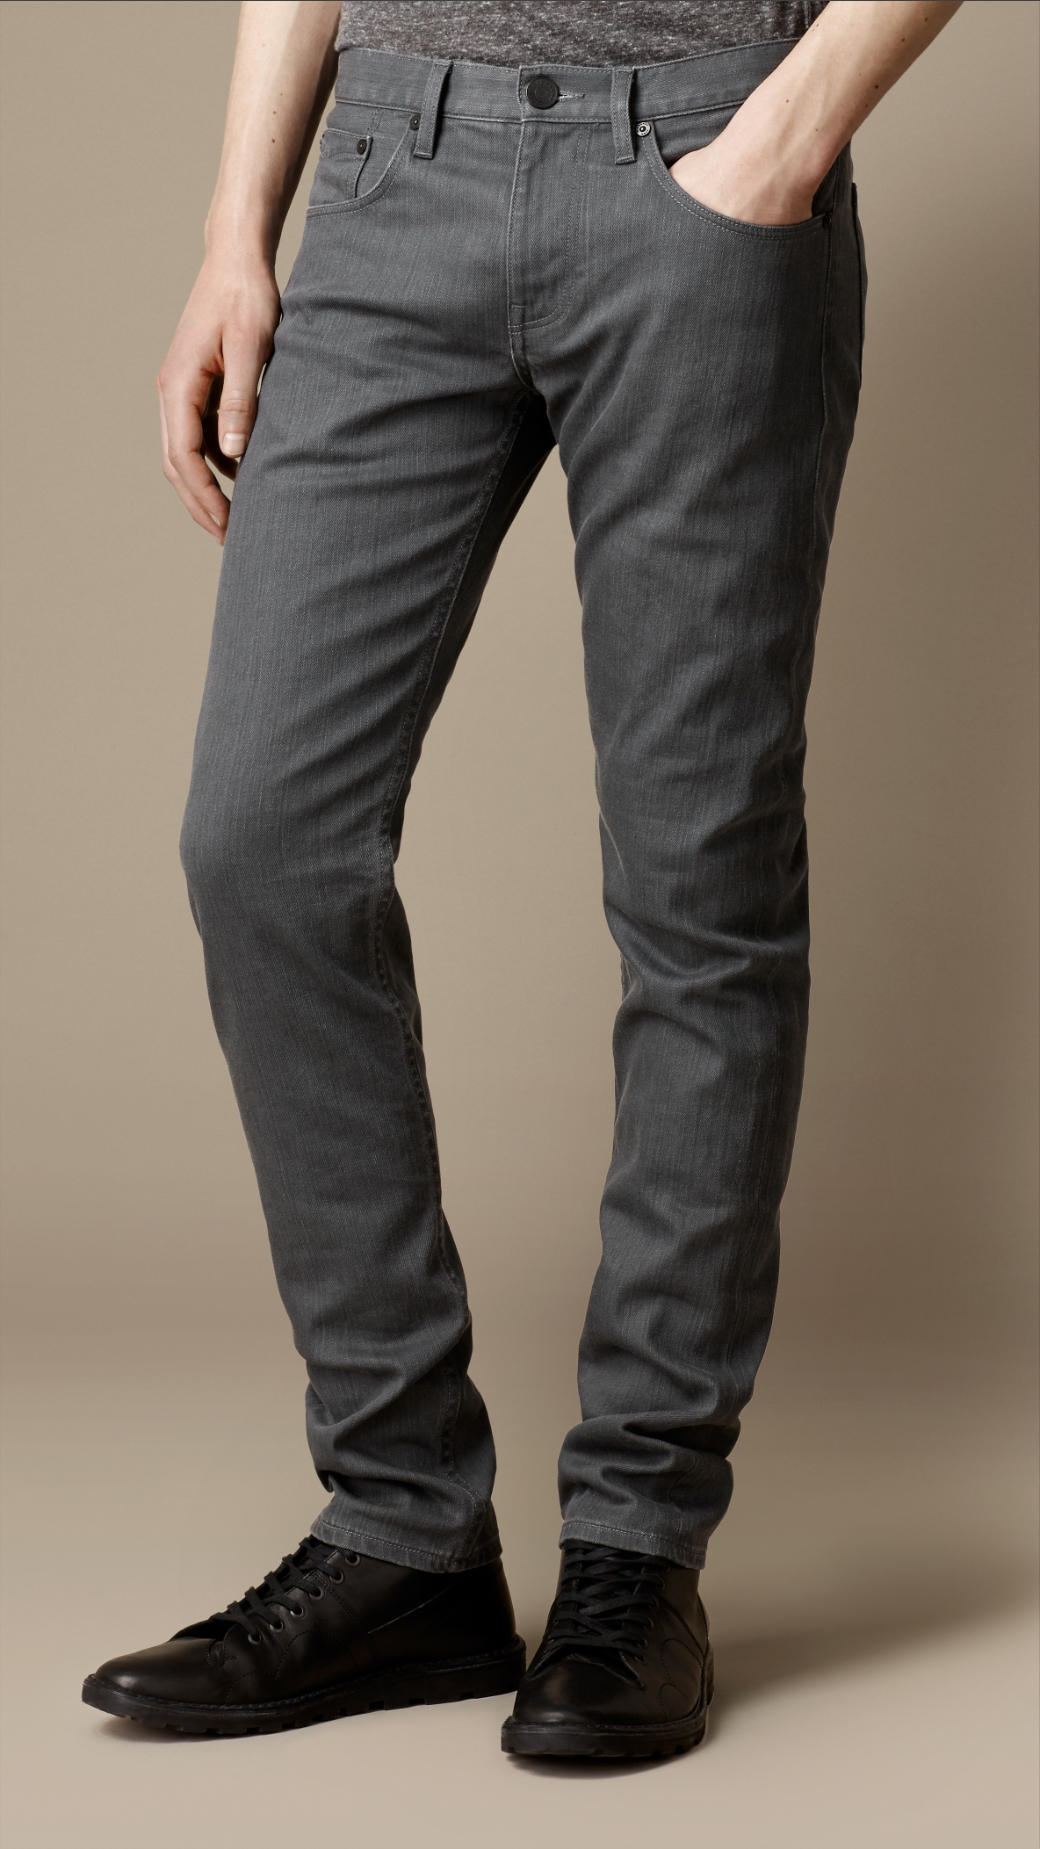 Burberry Shoreditch Resinated Skinny Fit Jeans in Silver Grey (Gray ...